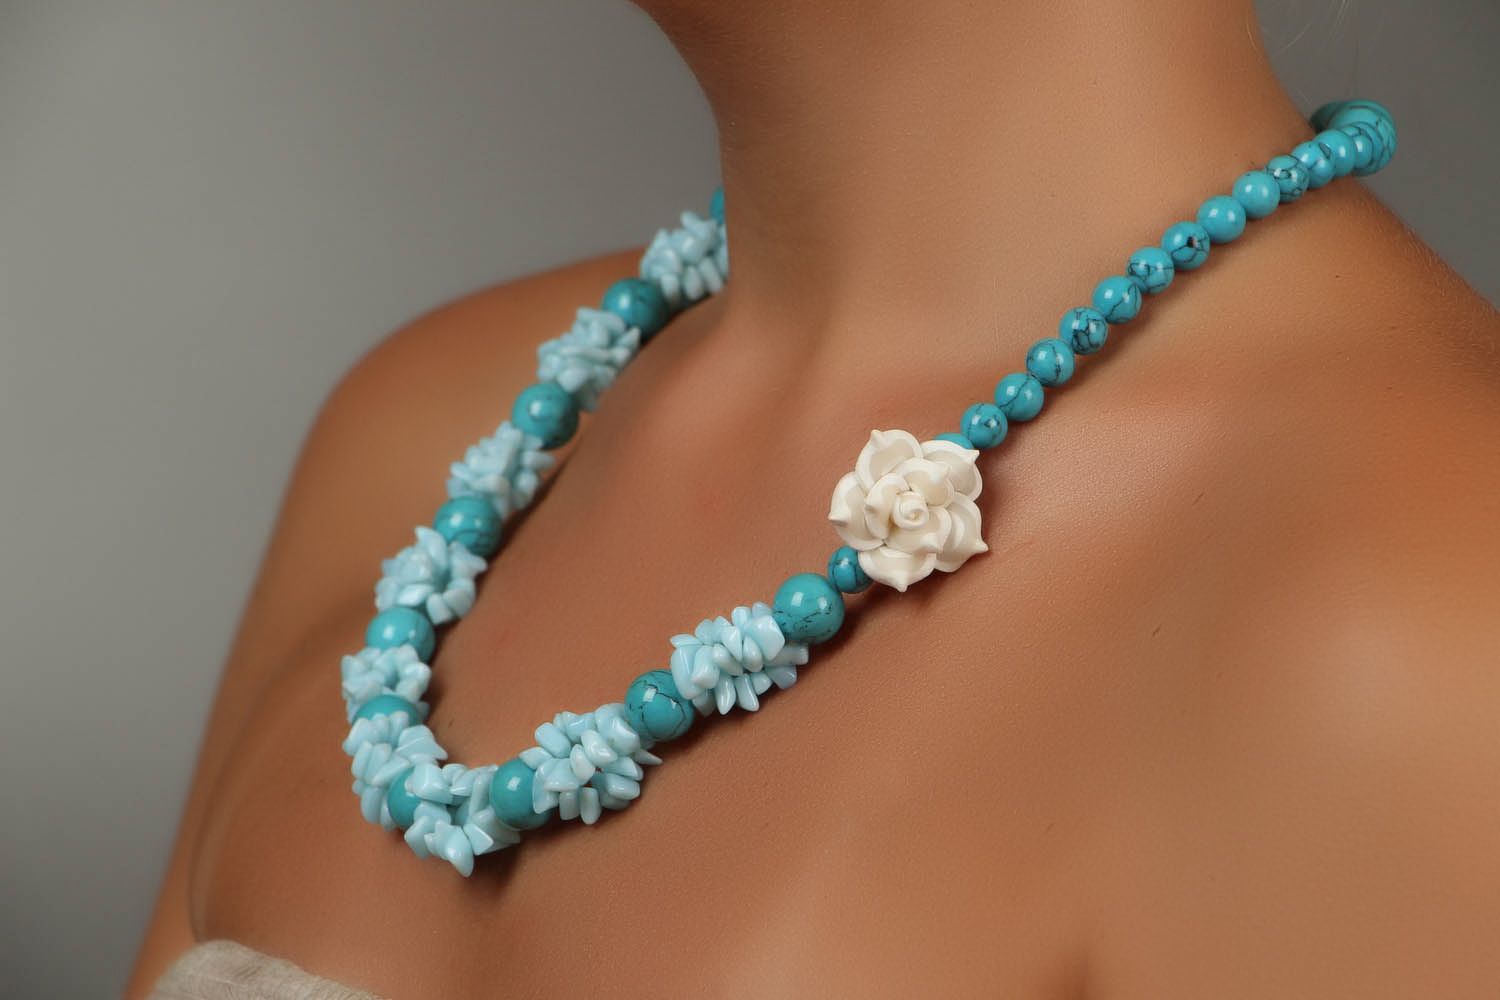 Bead necklace made of turquoise photo 5